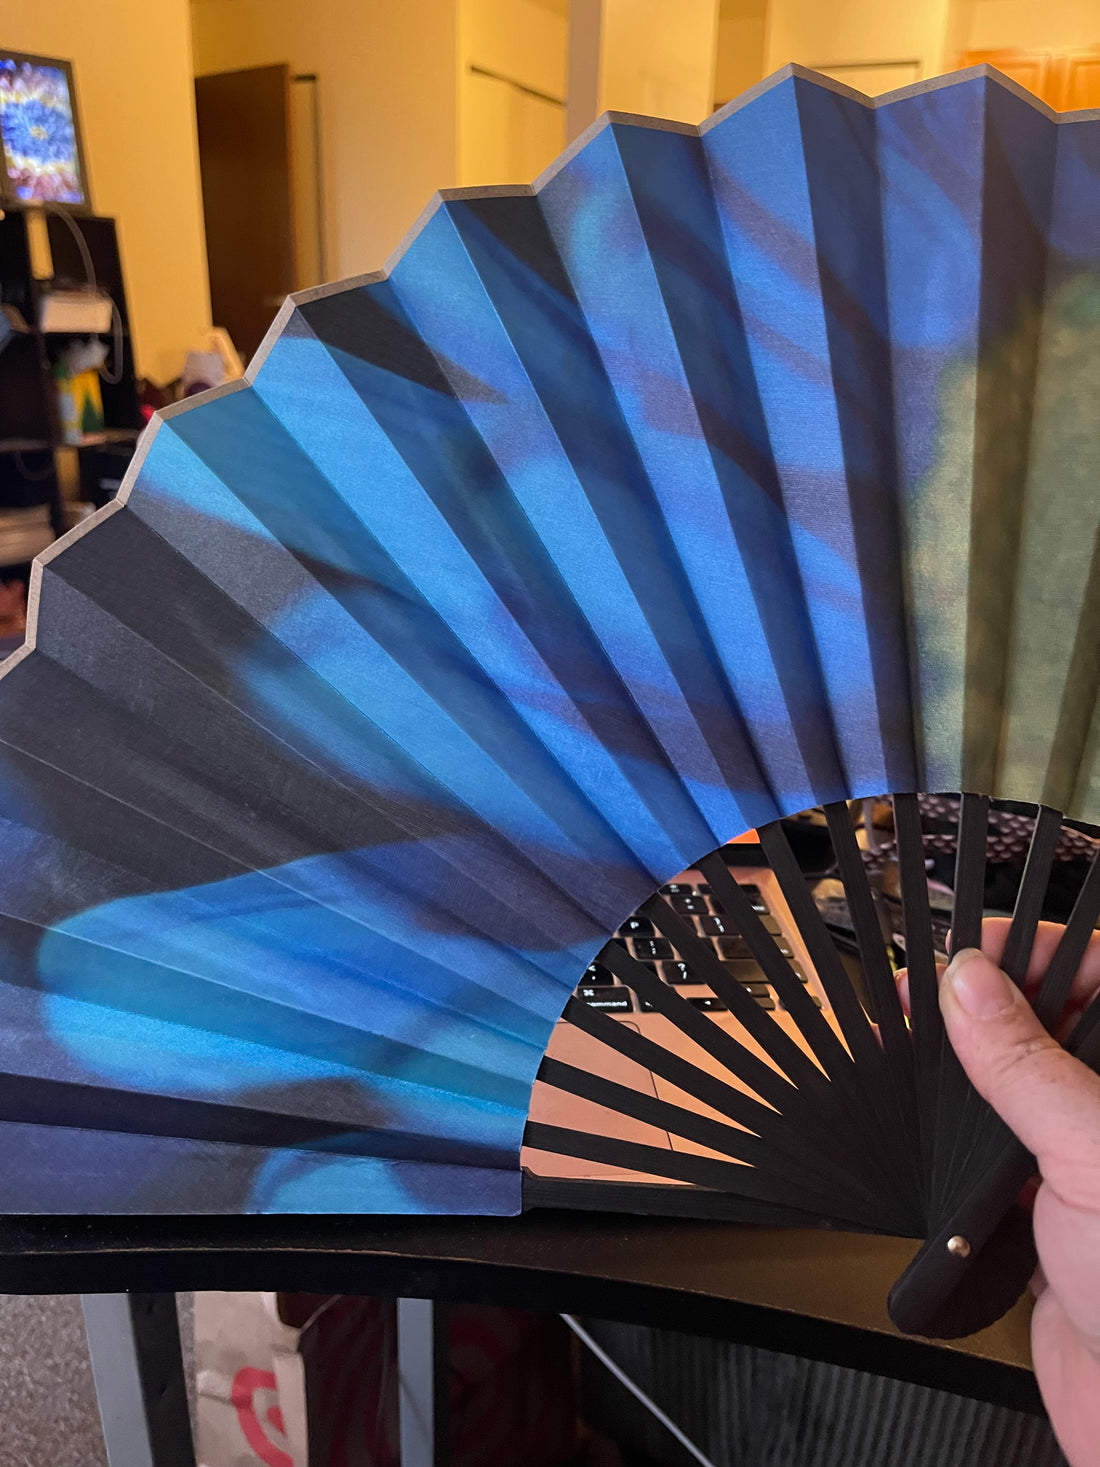 Silk Fans From This New Product Review